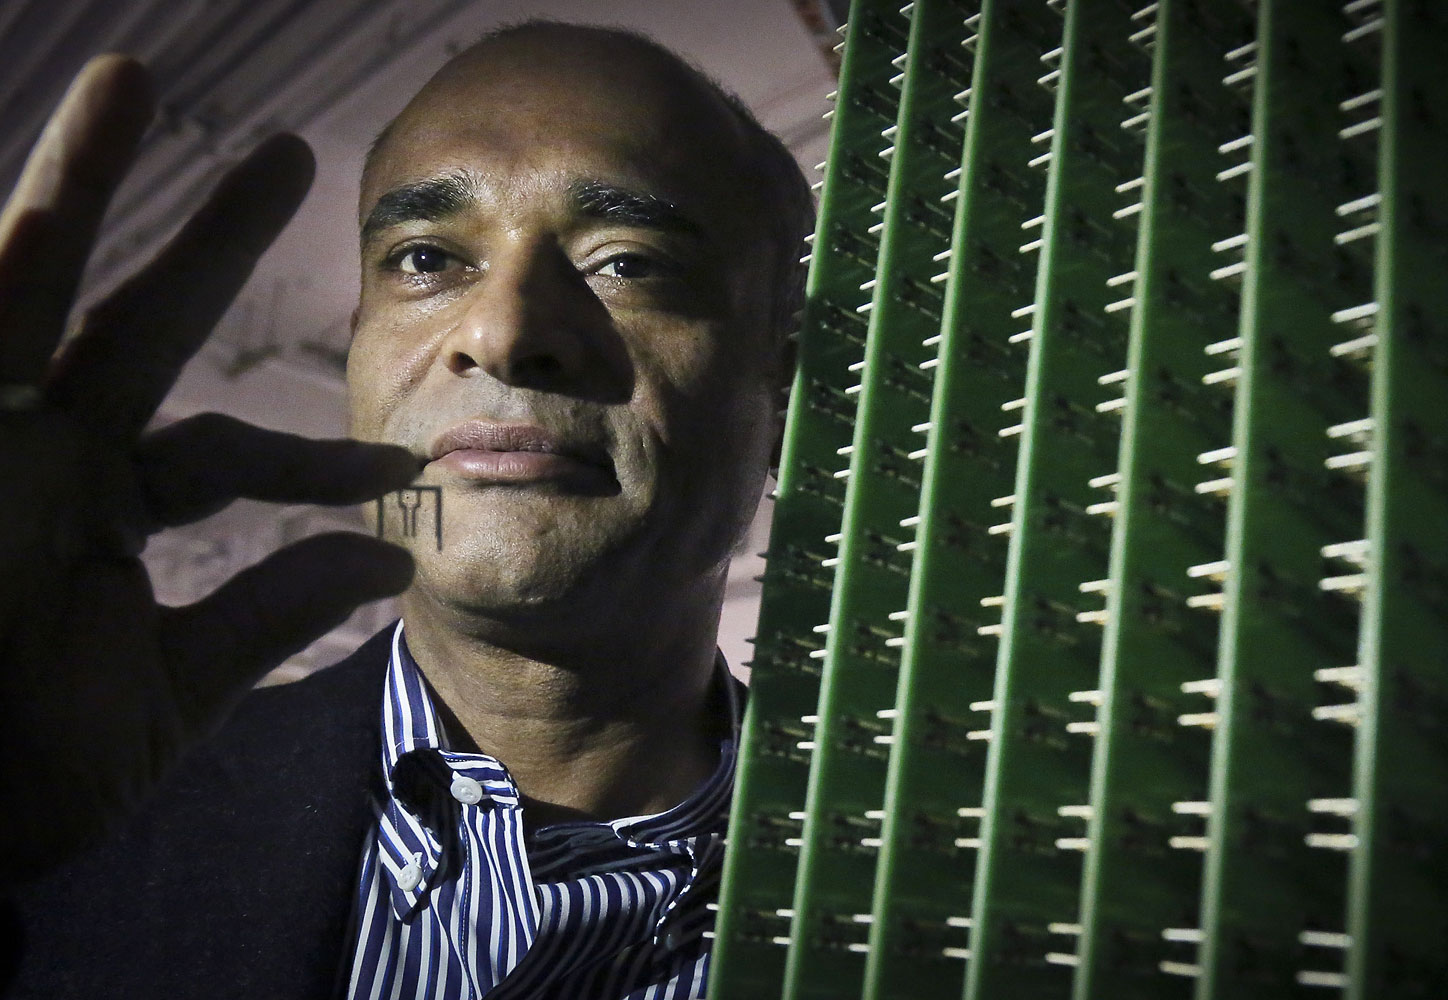 Chet Kanojia, founder and CEO of Aereo, Inc., stands next to a server array of antennas in New York, Dec. 20, 2012.